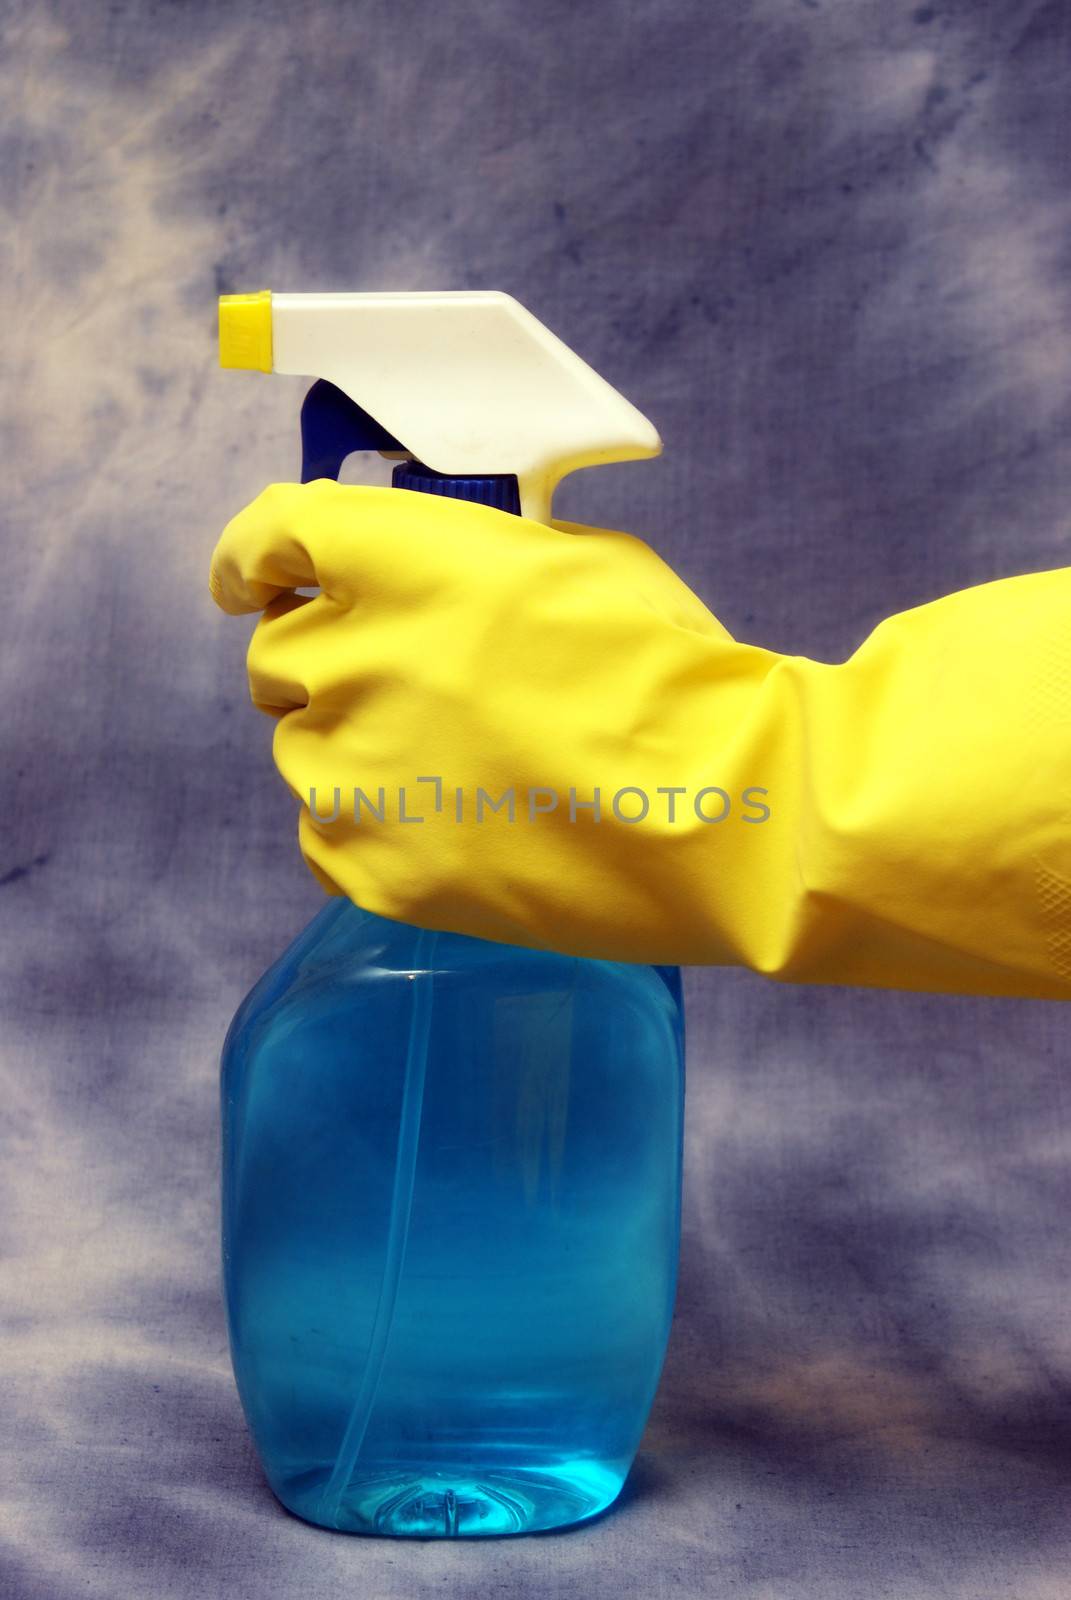 A cleaning person prepares to clean using a spray bottle.